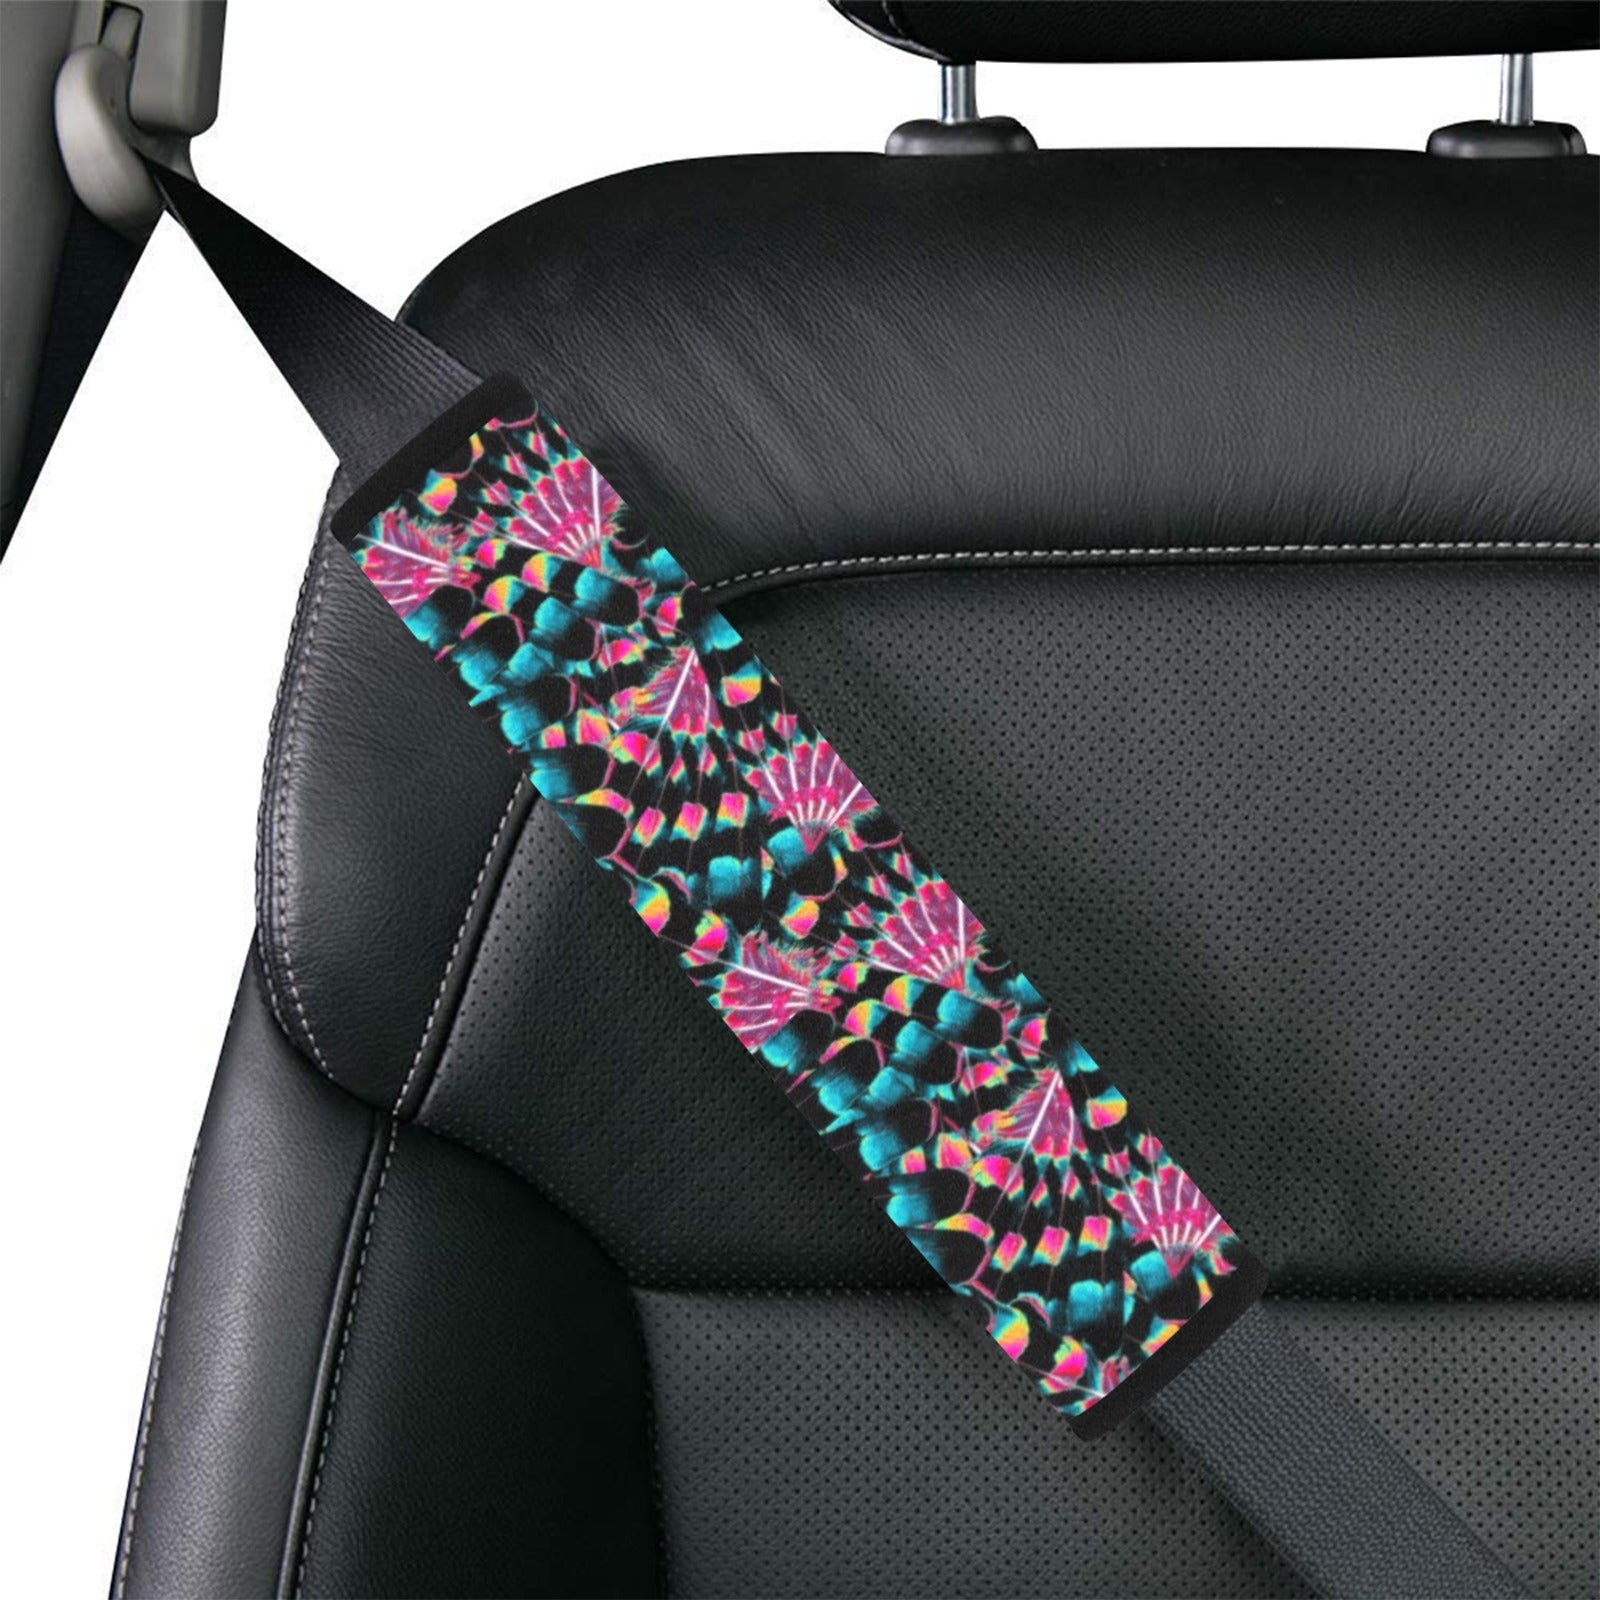 Hawk Feathers Heat Map Car Seat Belt Cover 7''x12.6'' (Pack of 2)